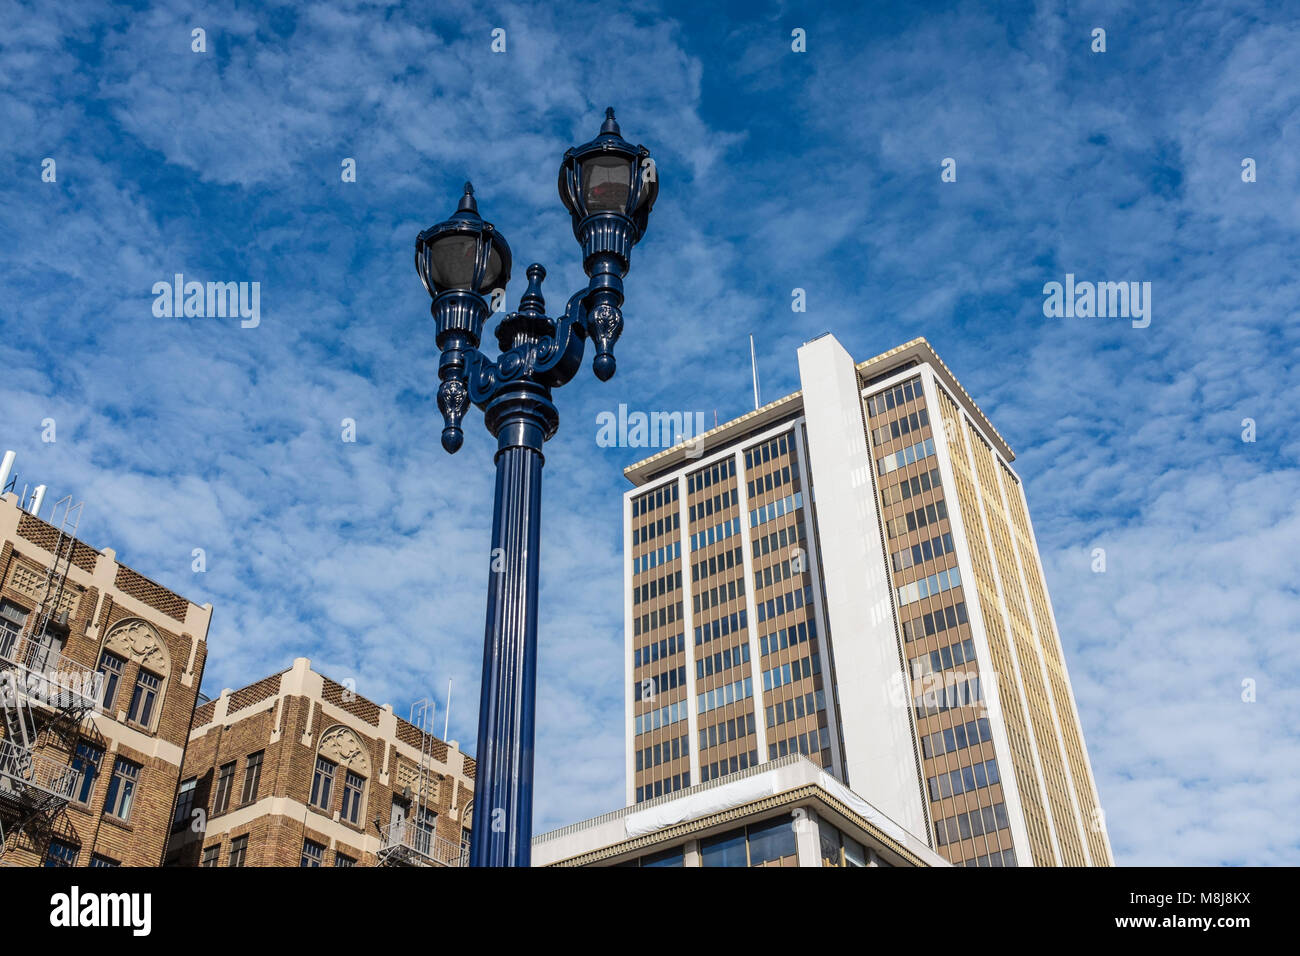 SAN DIEGO, CALIFORNIA, USA - Downtown San Diego in the historic Gaslamp Quater of the city. Stock Photo